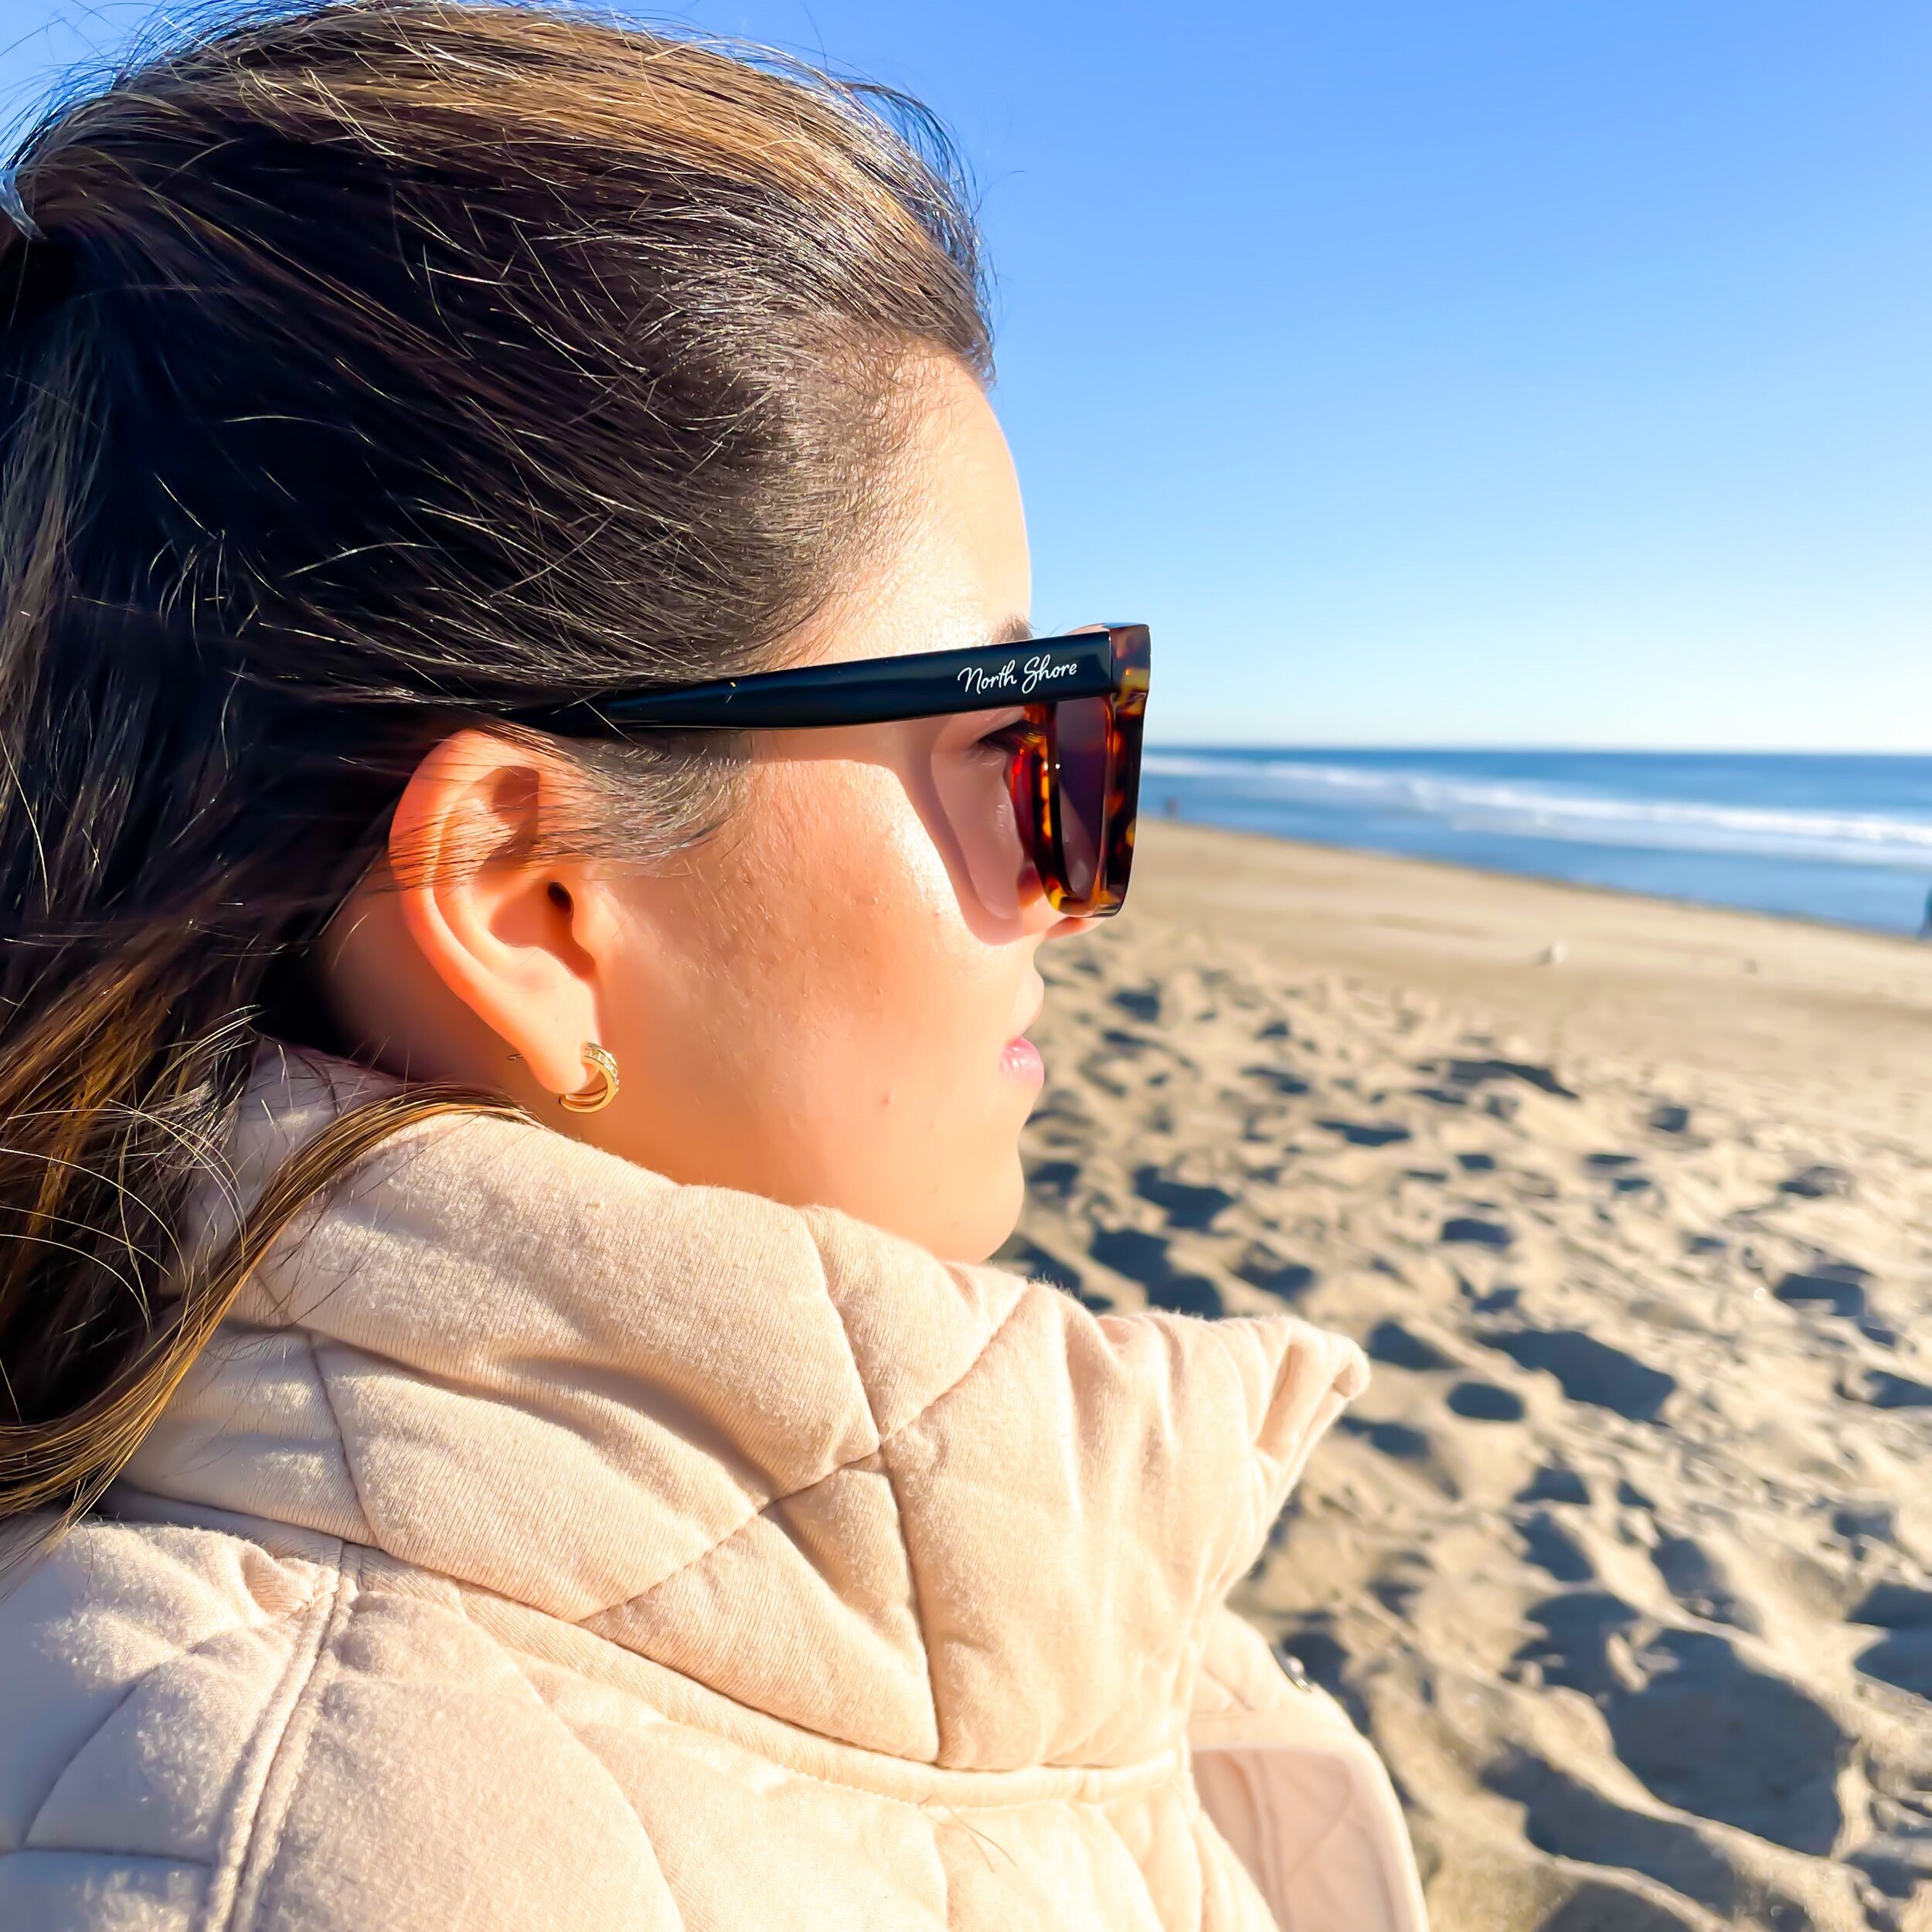 North Shore Sunglasses is where quality meets style 😎
Get your designer quality sunglasses in time for summer 🌞

#longislandbusiness 
#womenownedbusiness 
#sunglasseslover 
#thehamptons